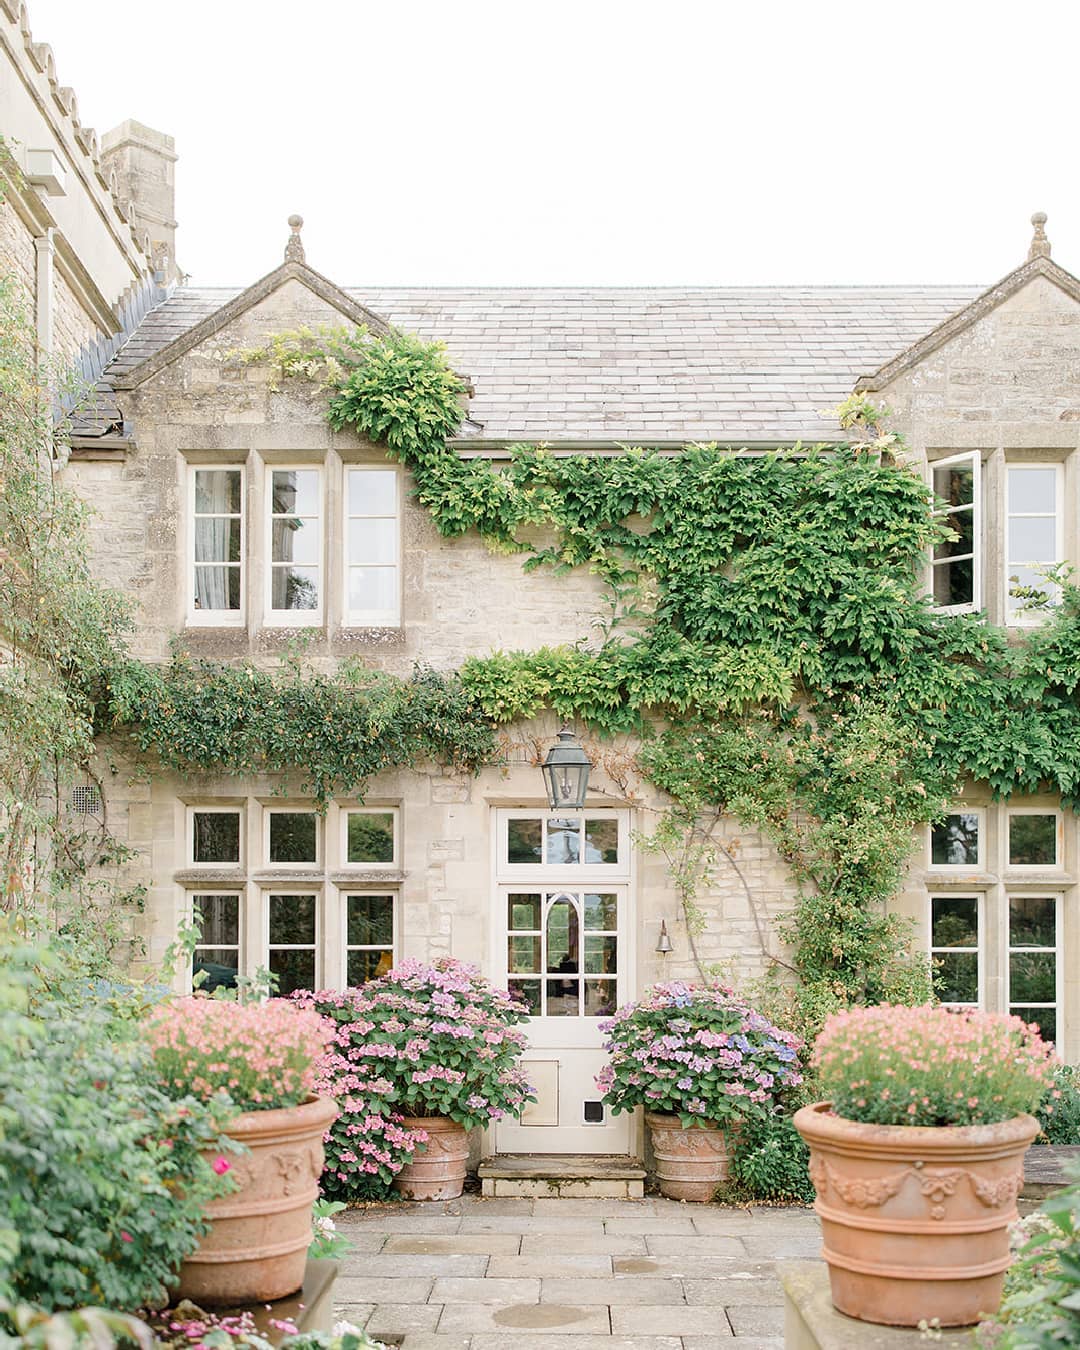 English garden cottage wedding venue with climbing ivy and terra cotta urns